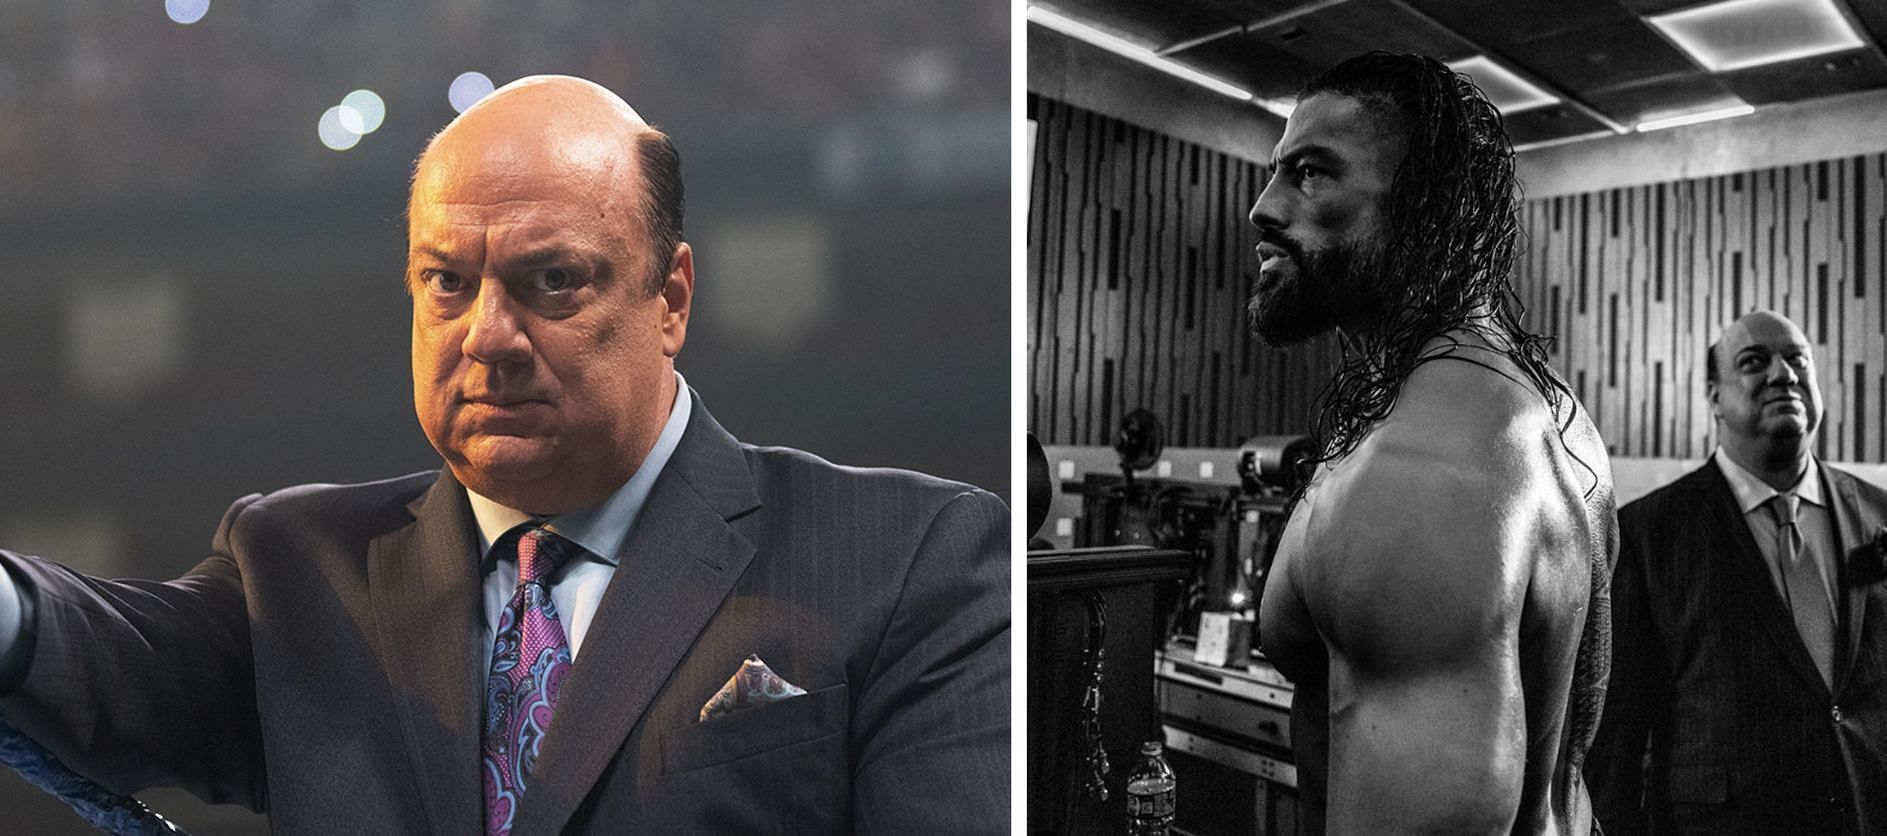 Paul Heyman could be in need of a new client